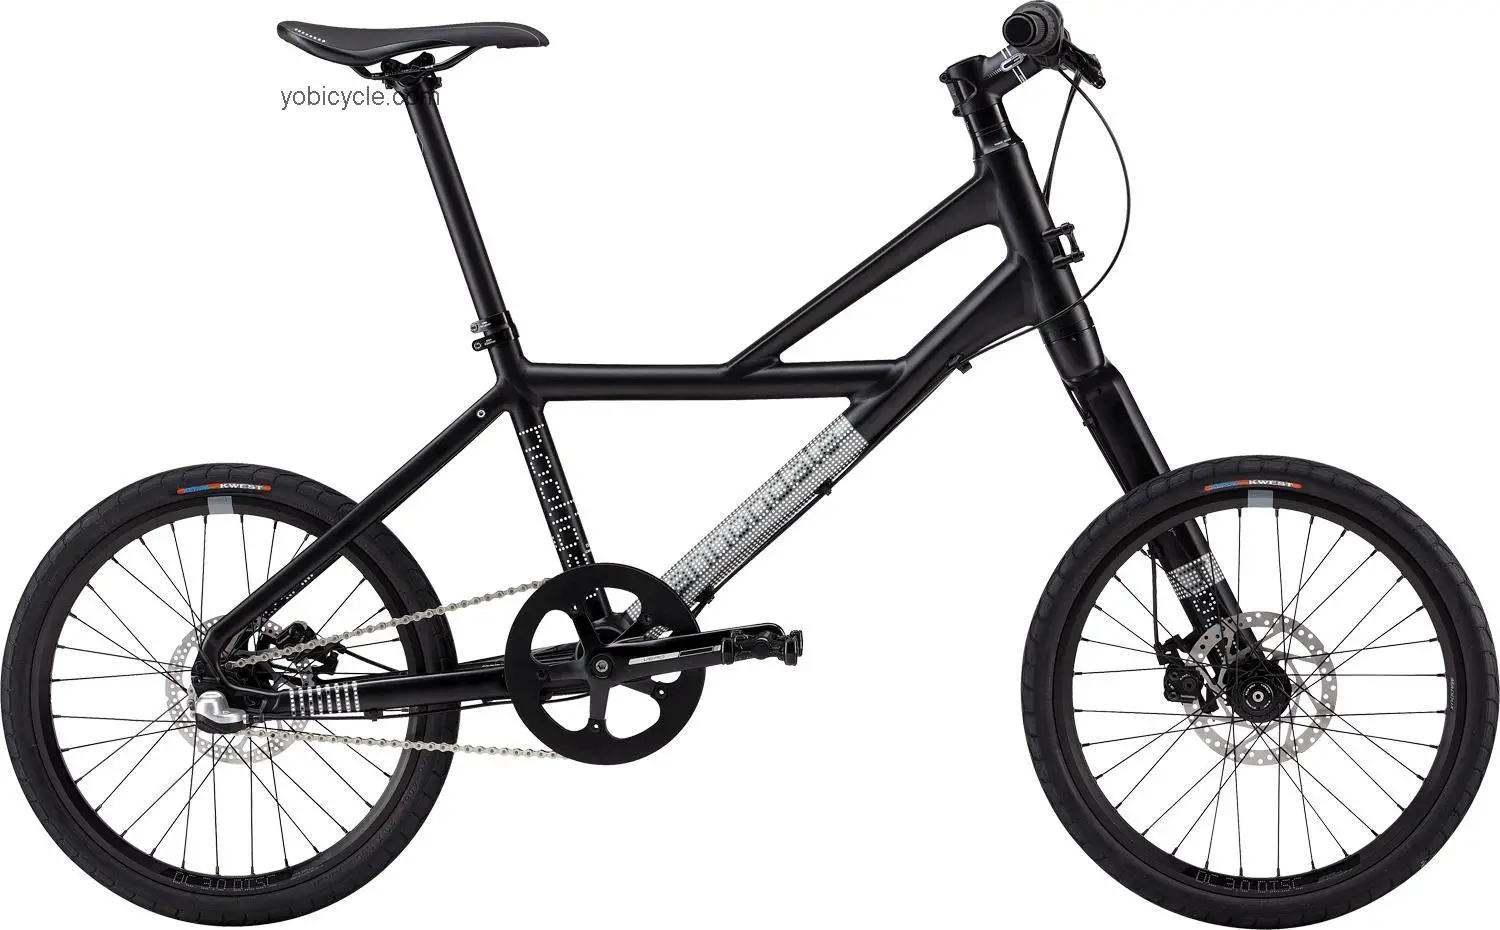 Cannondale Hooligan 1 2013 comparison online with competitors